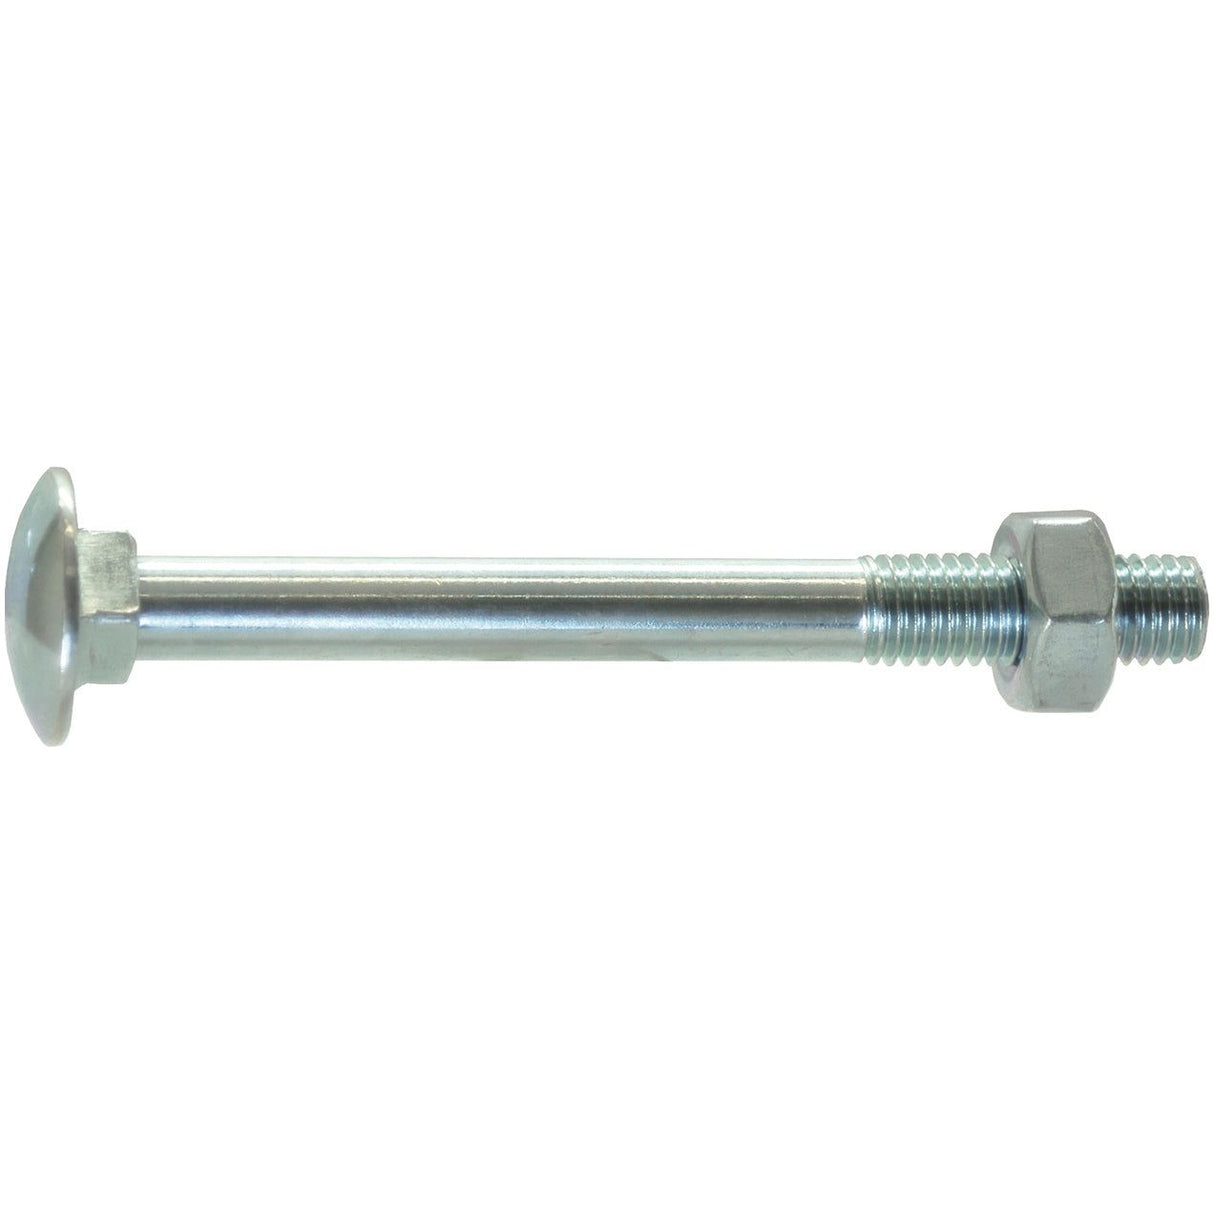 Metric Carriage Bolt and Nut, Size: M12 x 75mm (Din 603/555)
 - S.8303 - Farming Parts